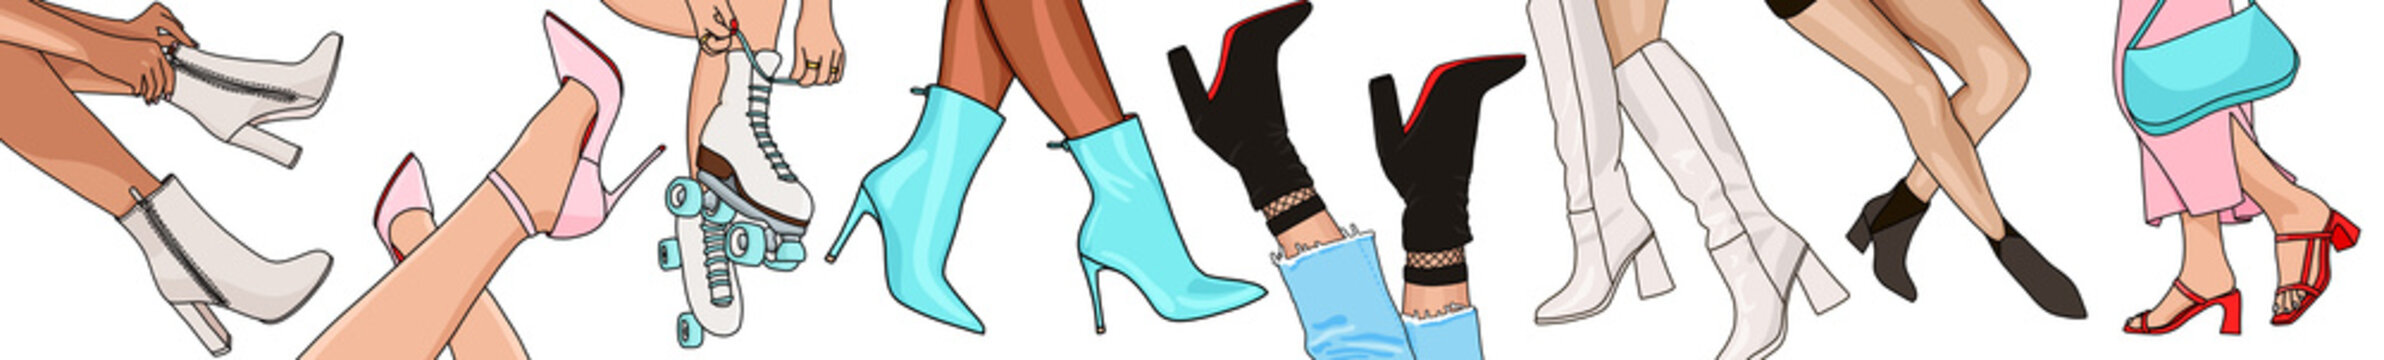 Illustration of women legs with different skin colors and shoes on a variety of poses